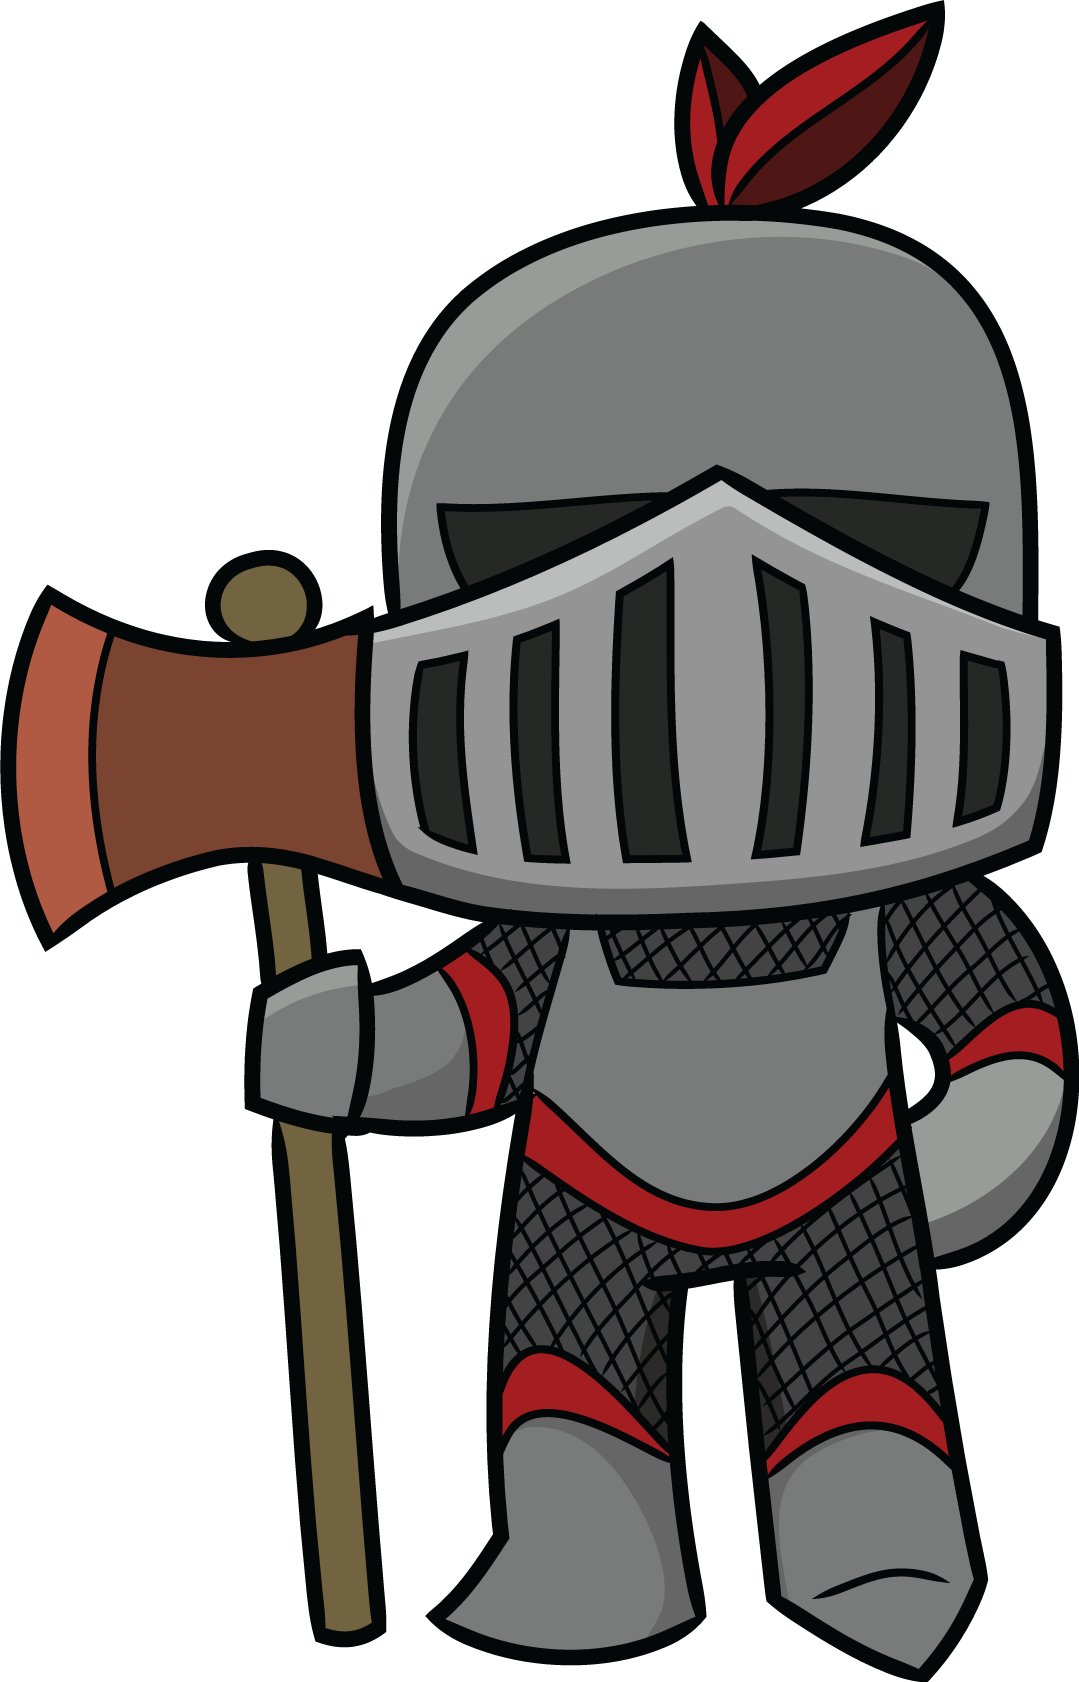 Medieval knight cartoon medieval ages knights vector cliparts ...